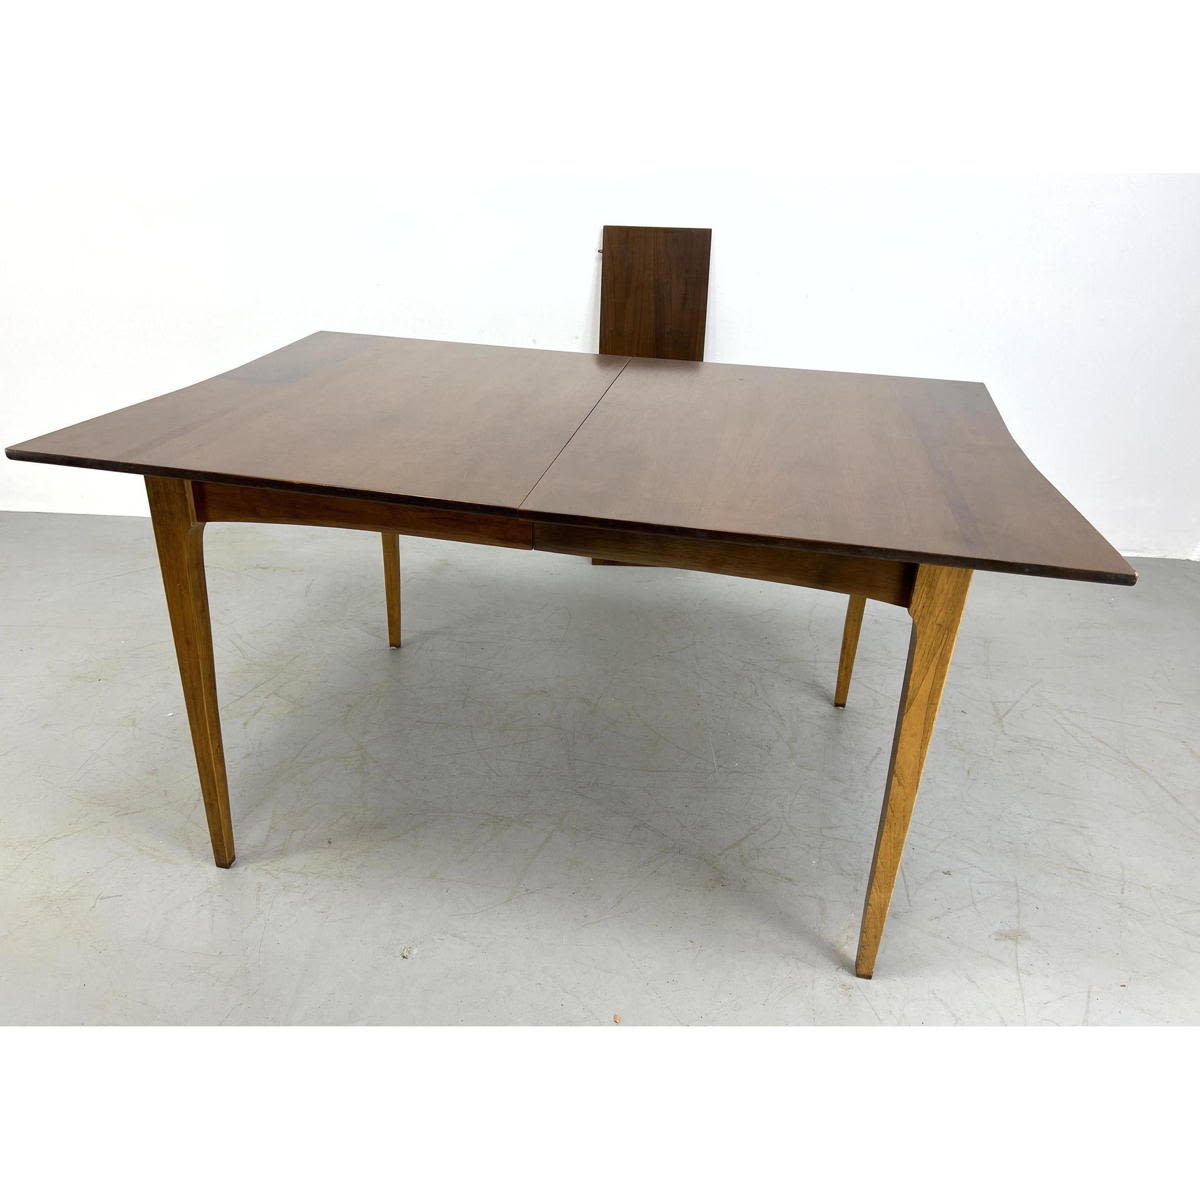 Modern dining table with one leave.